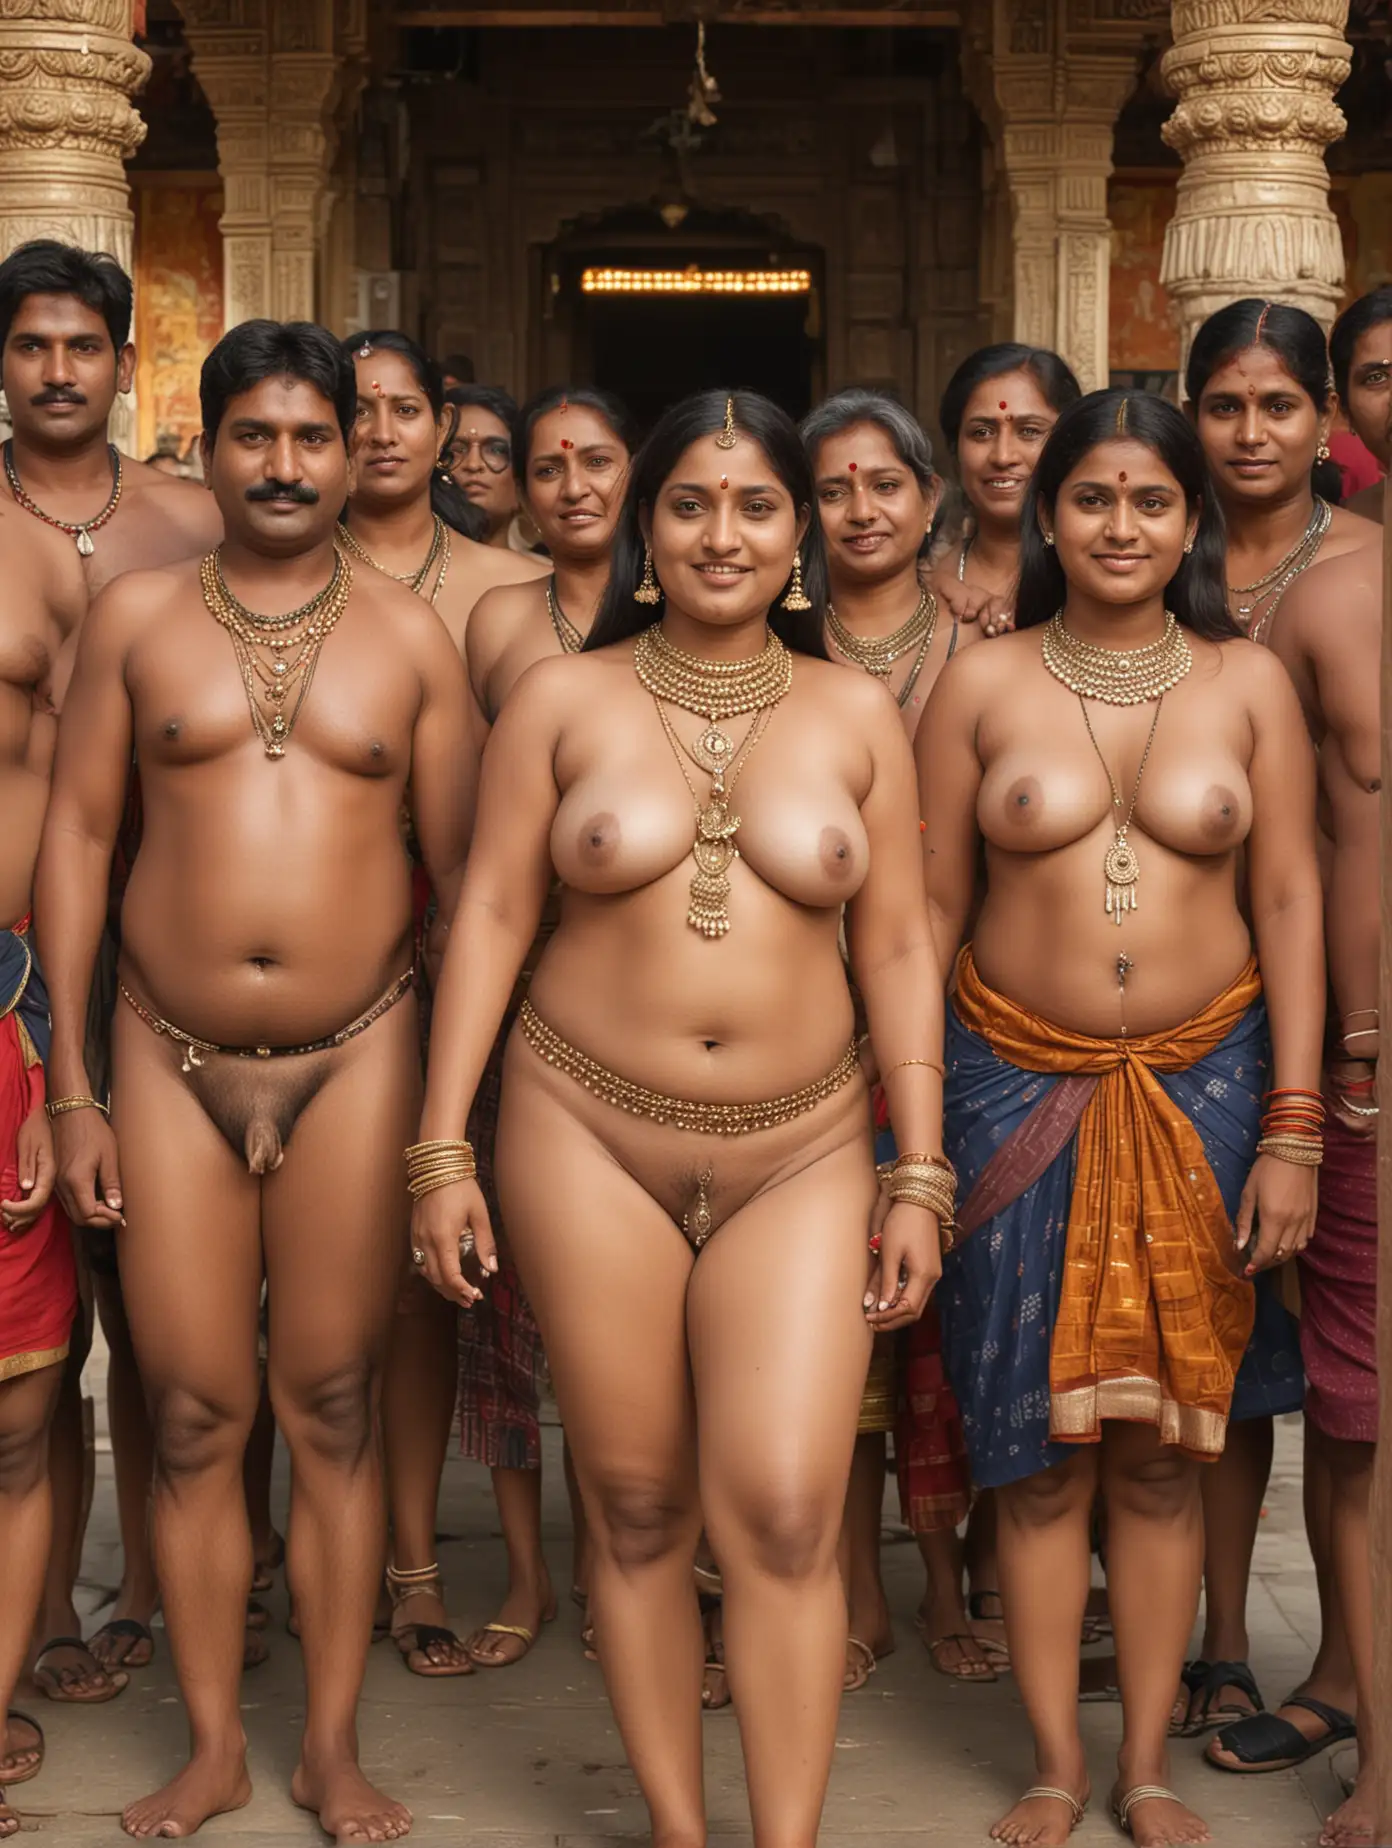 Indian chubby mature mom naked with ornaments & with nose ring & with nipple ornaments & waist chain. Also south Indian daughter naked with slim body next to mother. Surrounded by brothers and fathers. in temple.